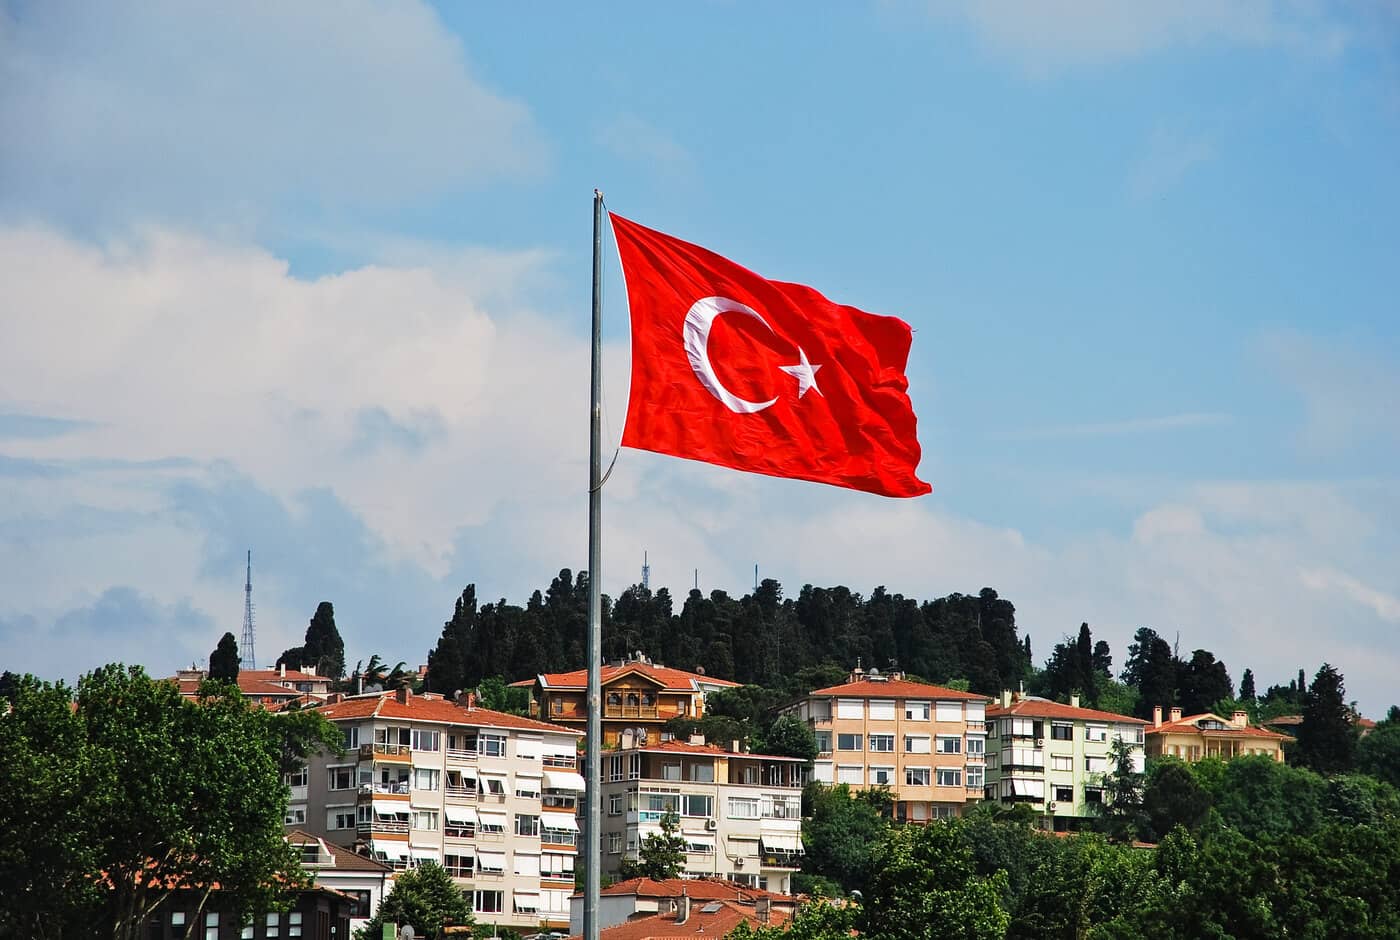 Turkey’s President Appoints Crypto Expert To Monetary Policy Committee